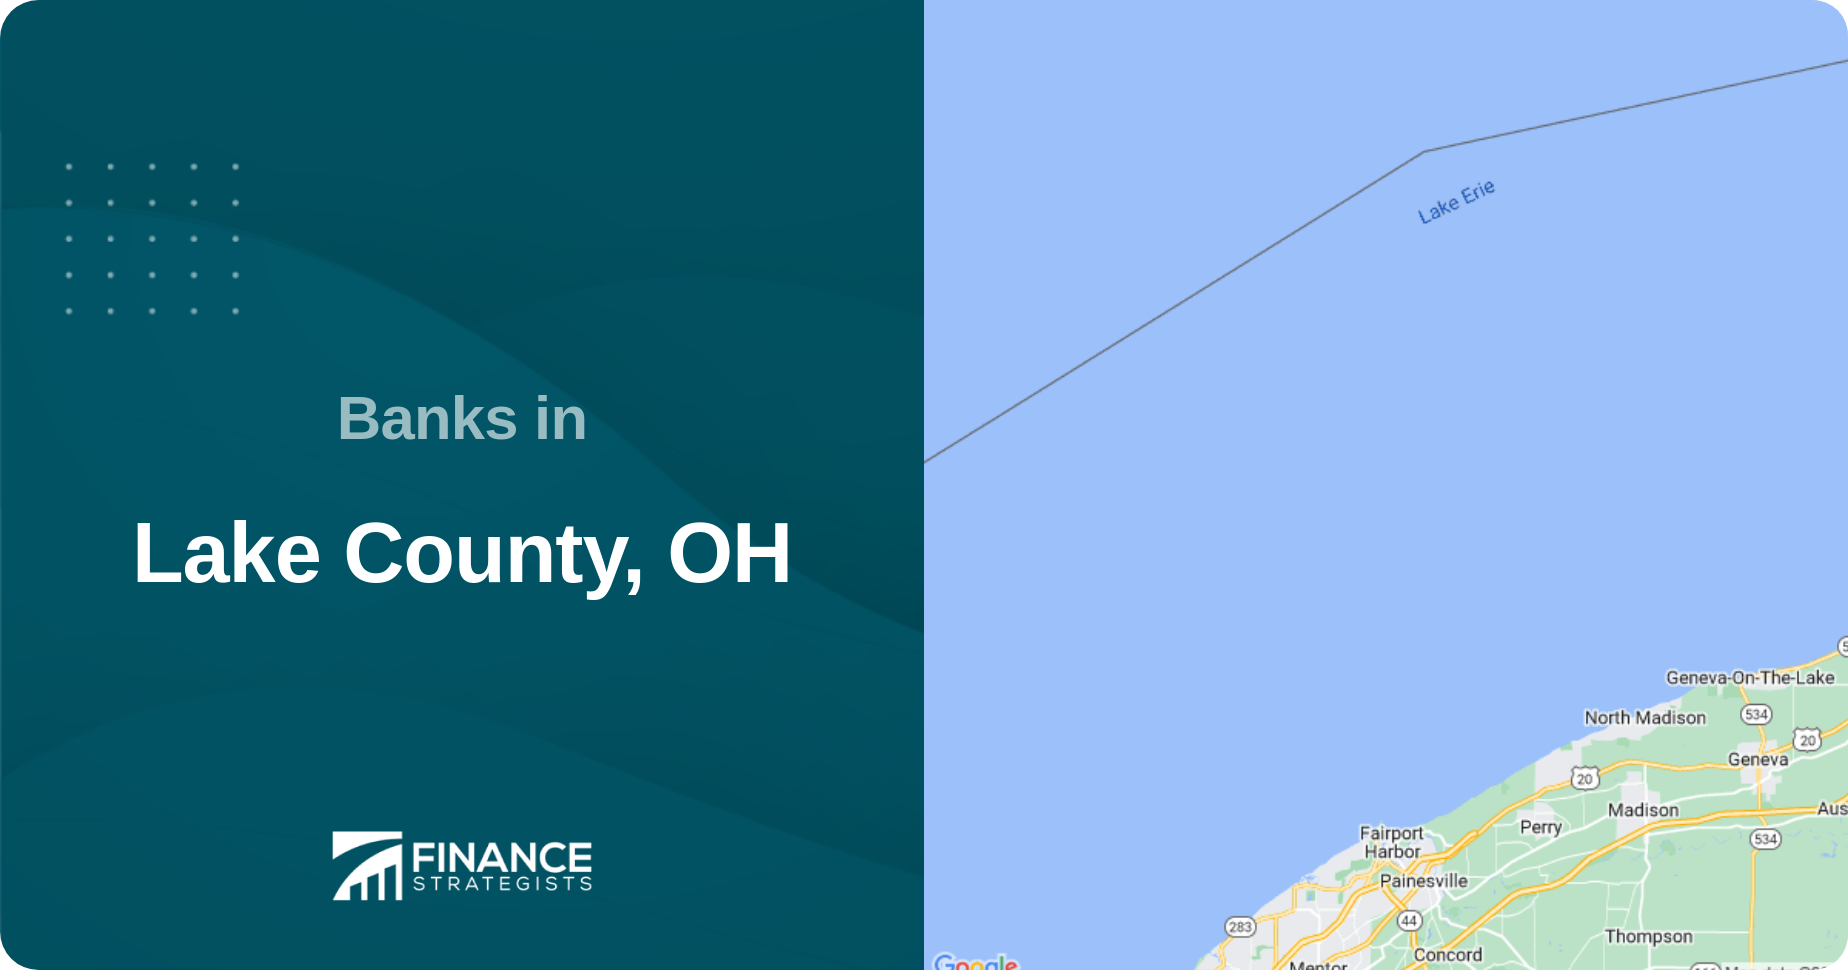 Banks in Lake County, OH